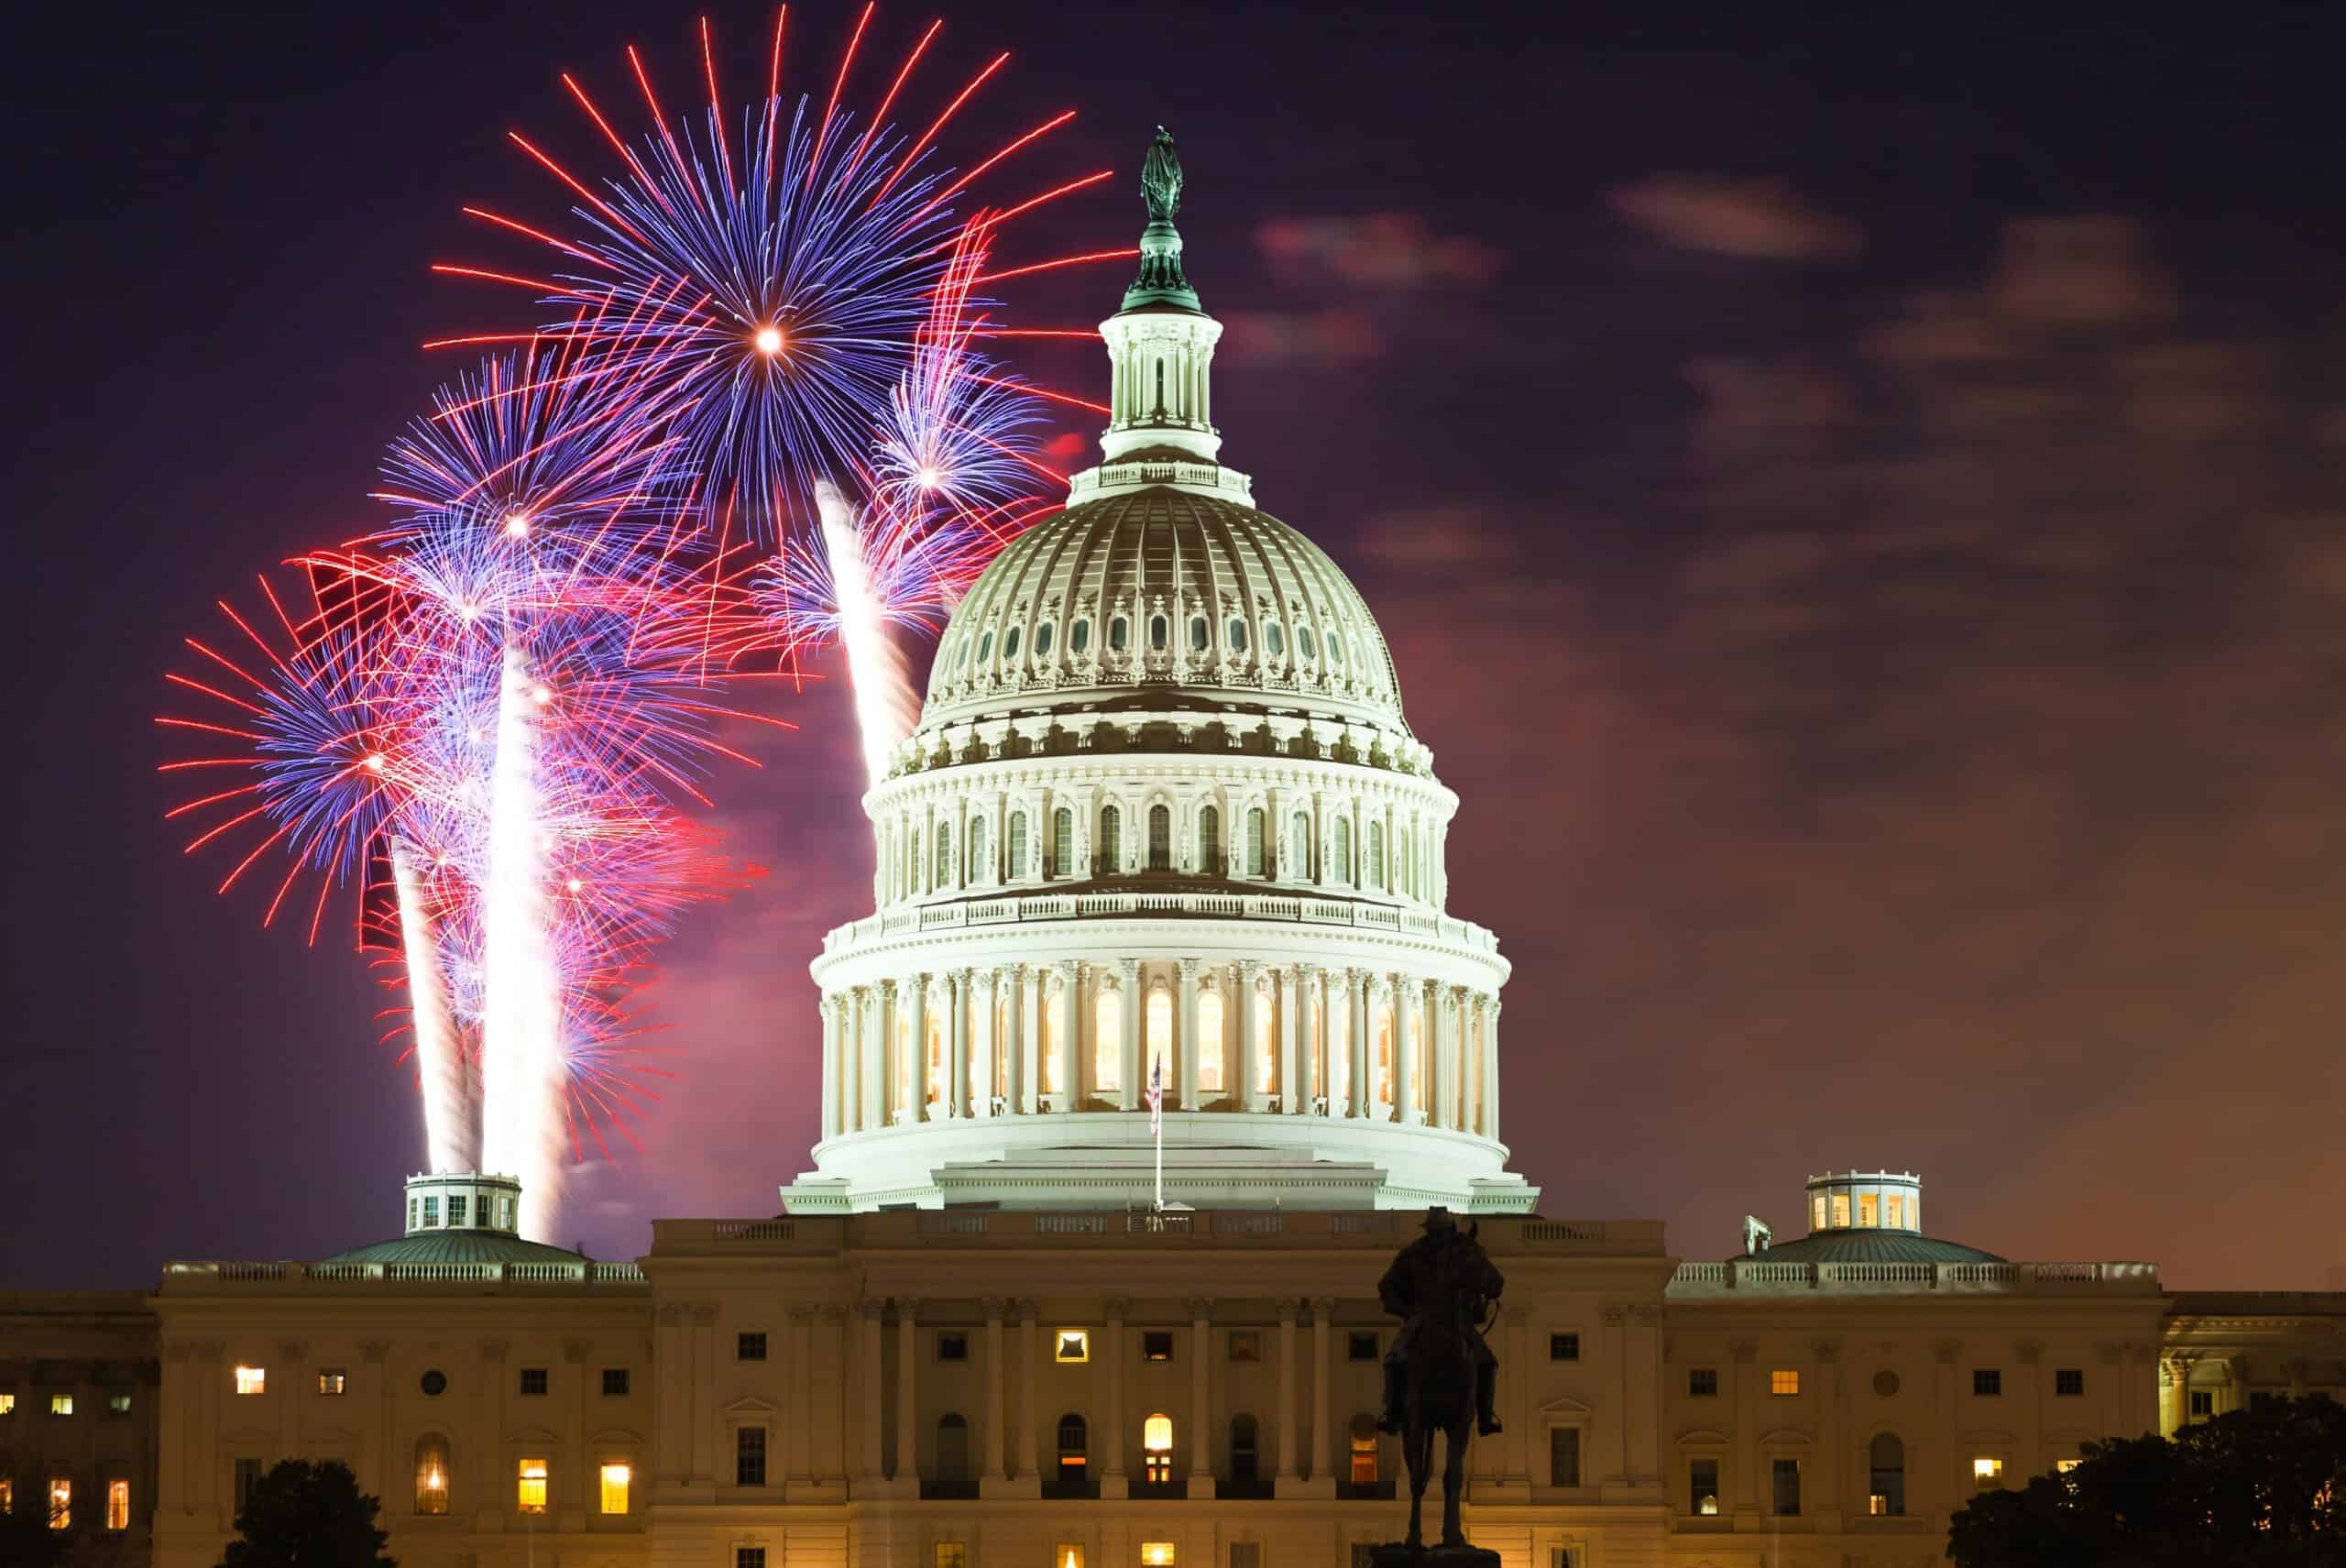 Fireworks happening over the U.S. Capital. 